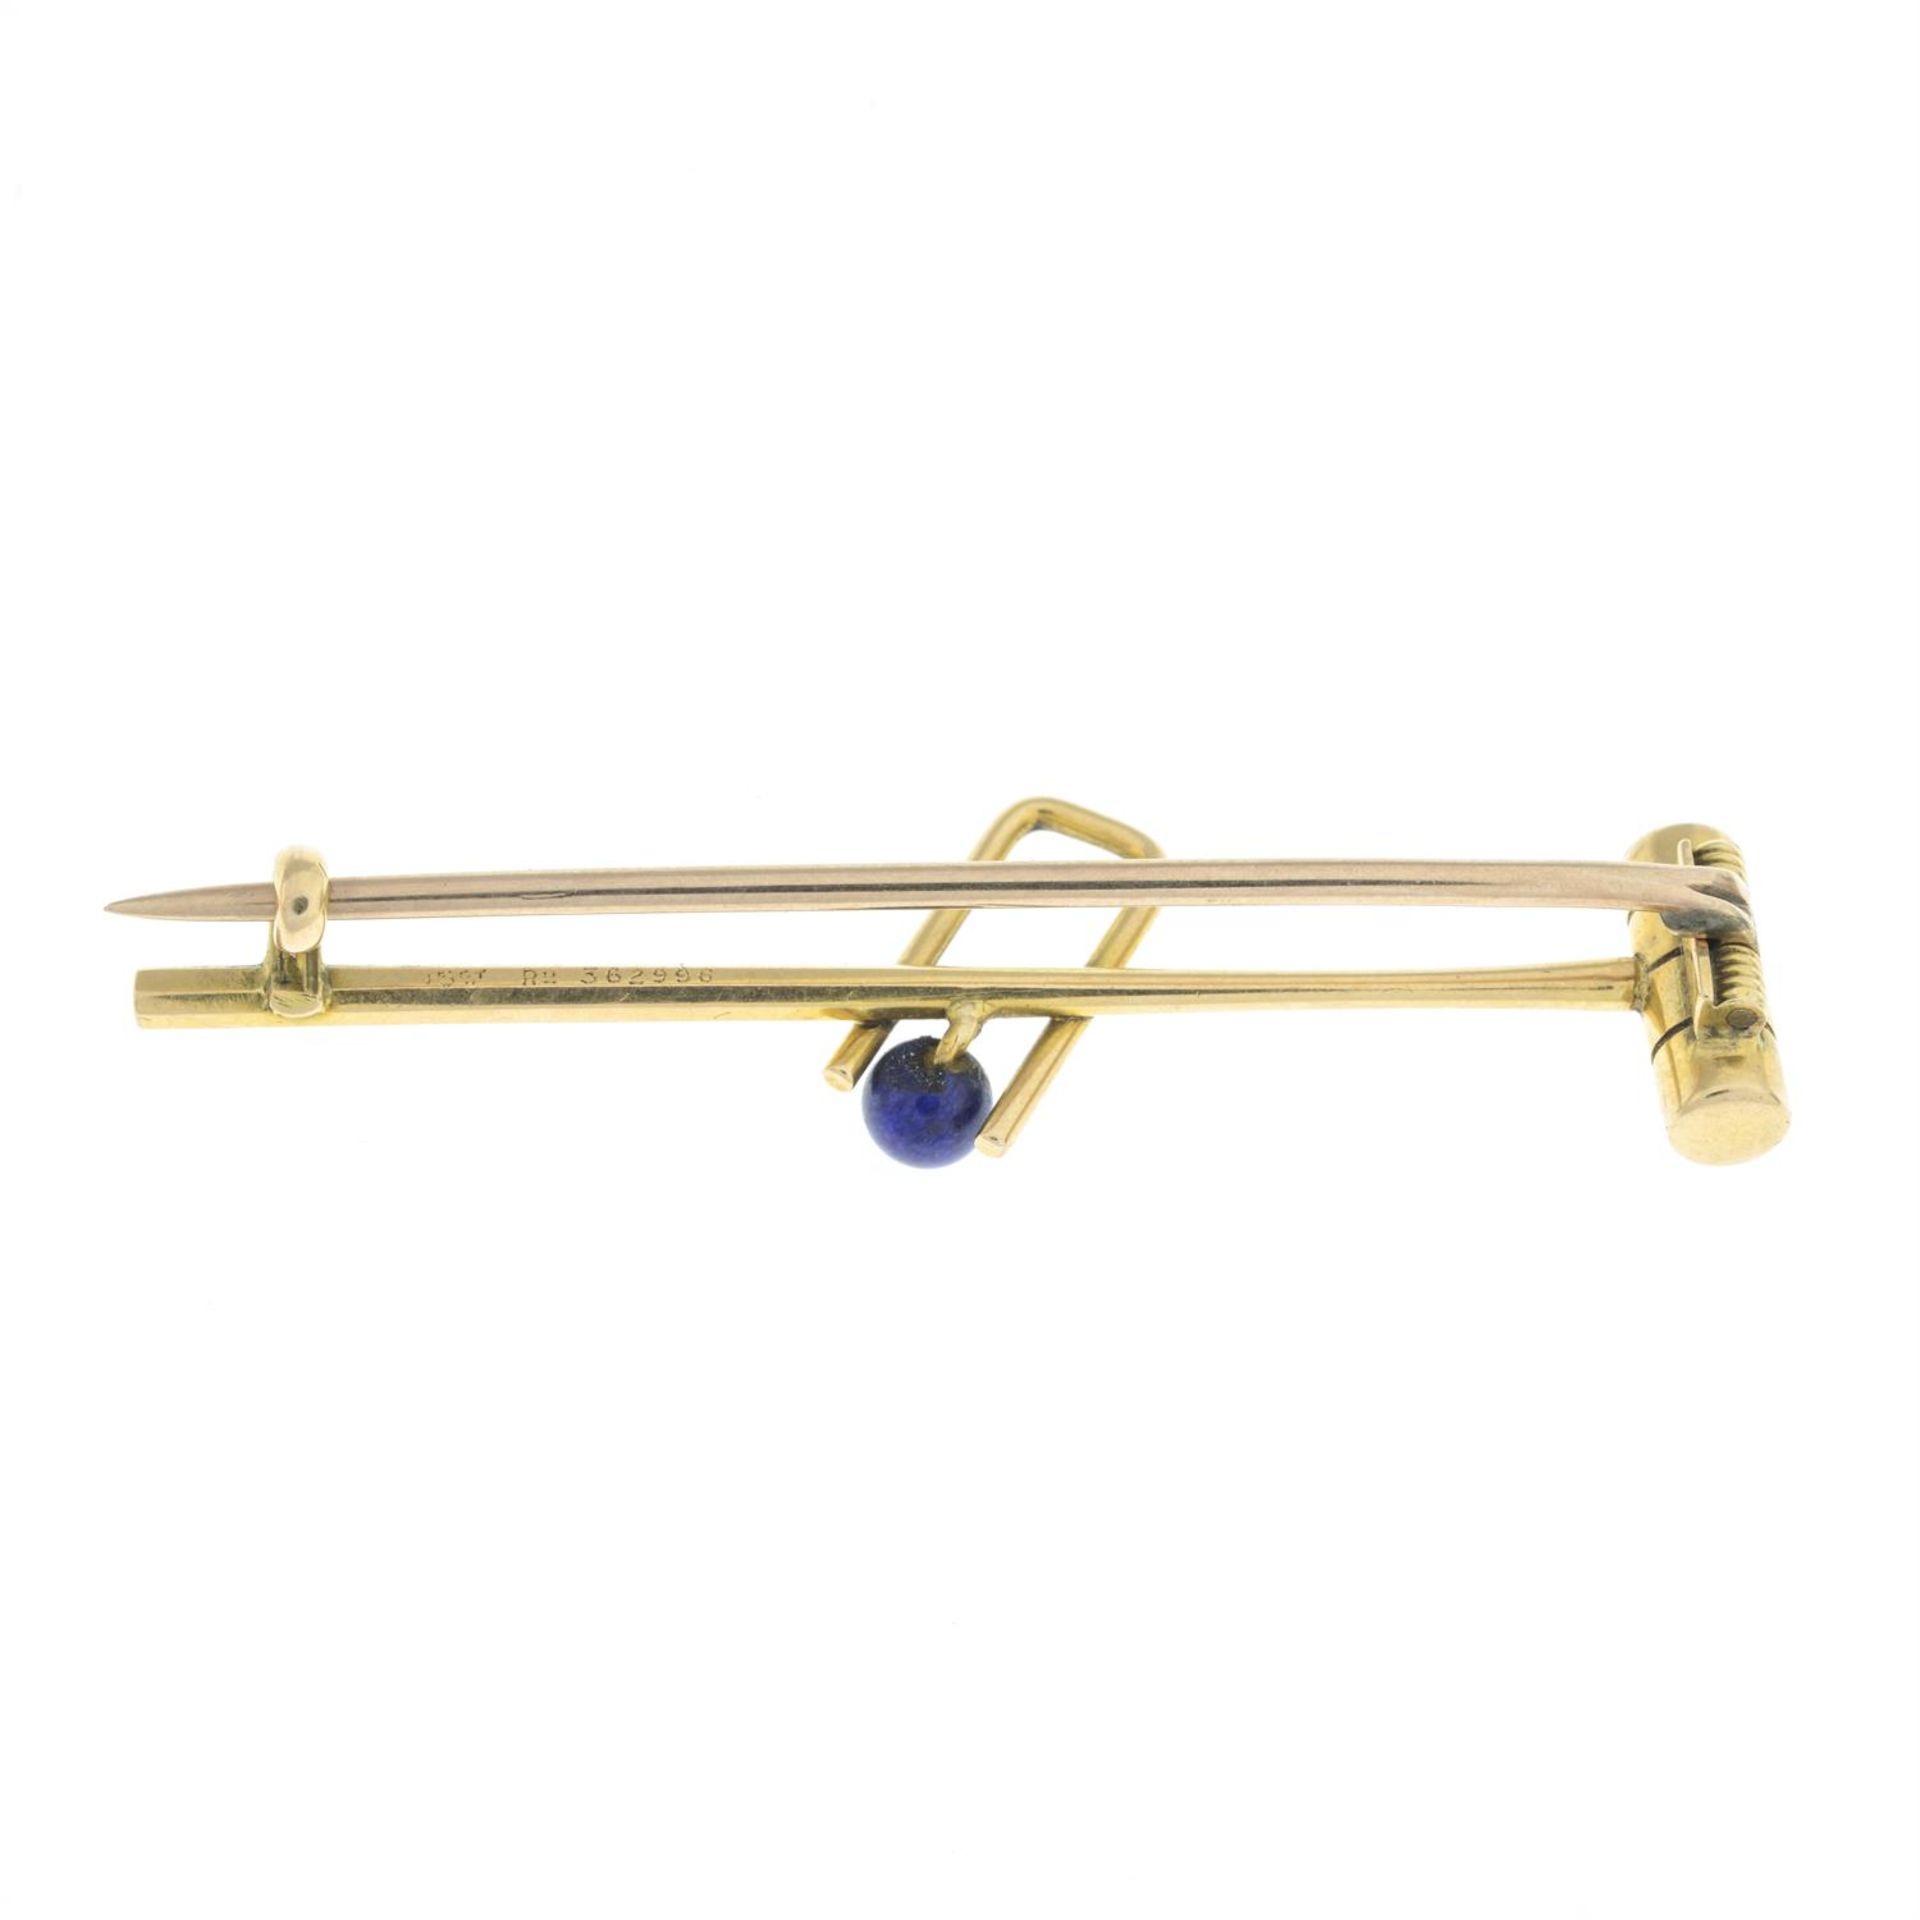 Early 20th century 15ct gold enamel & lapis lazuli croquet brooch - Image 2 of 2